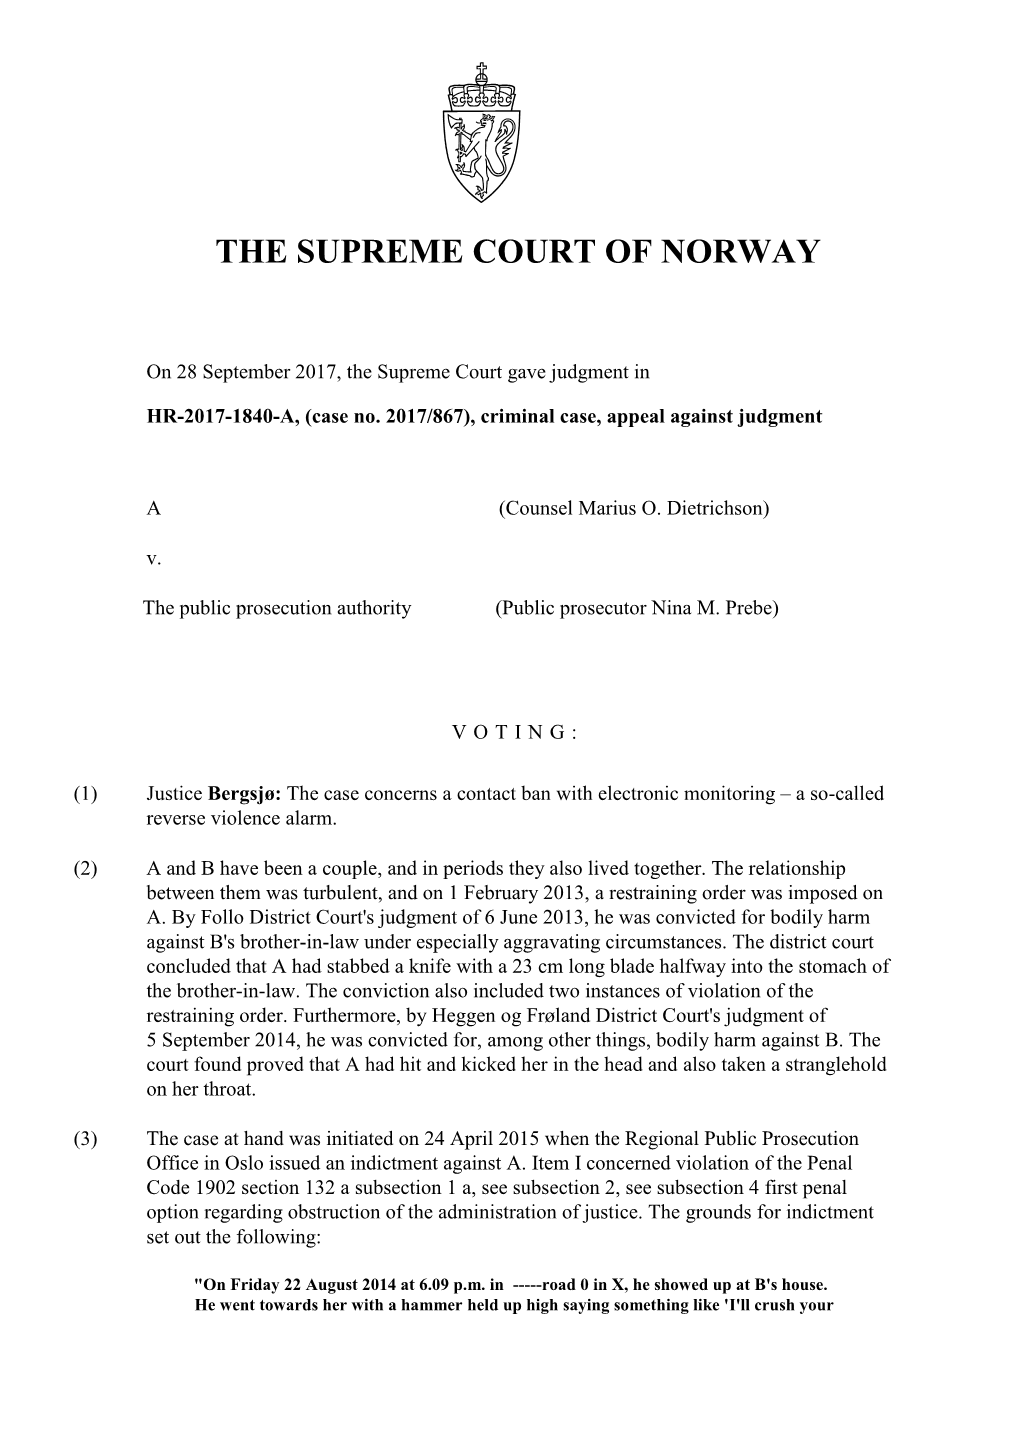 The Supreme Court of Norway